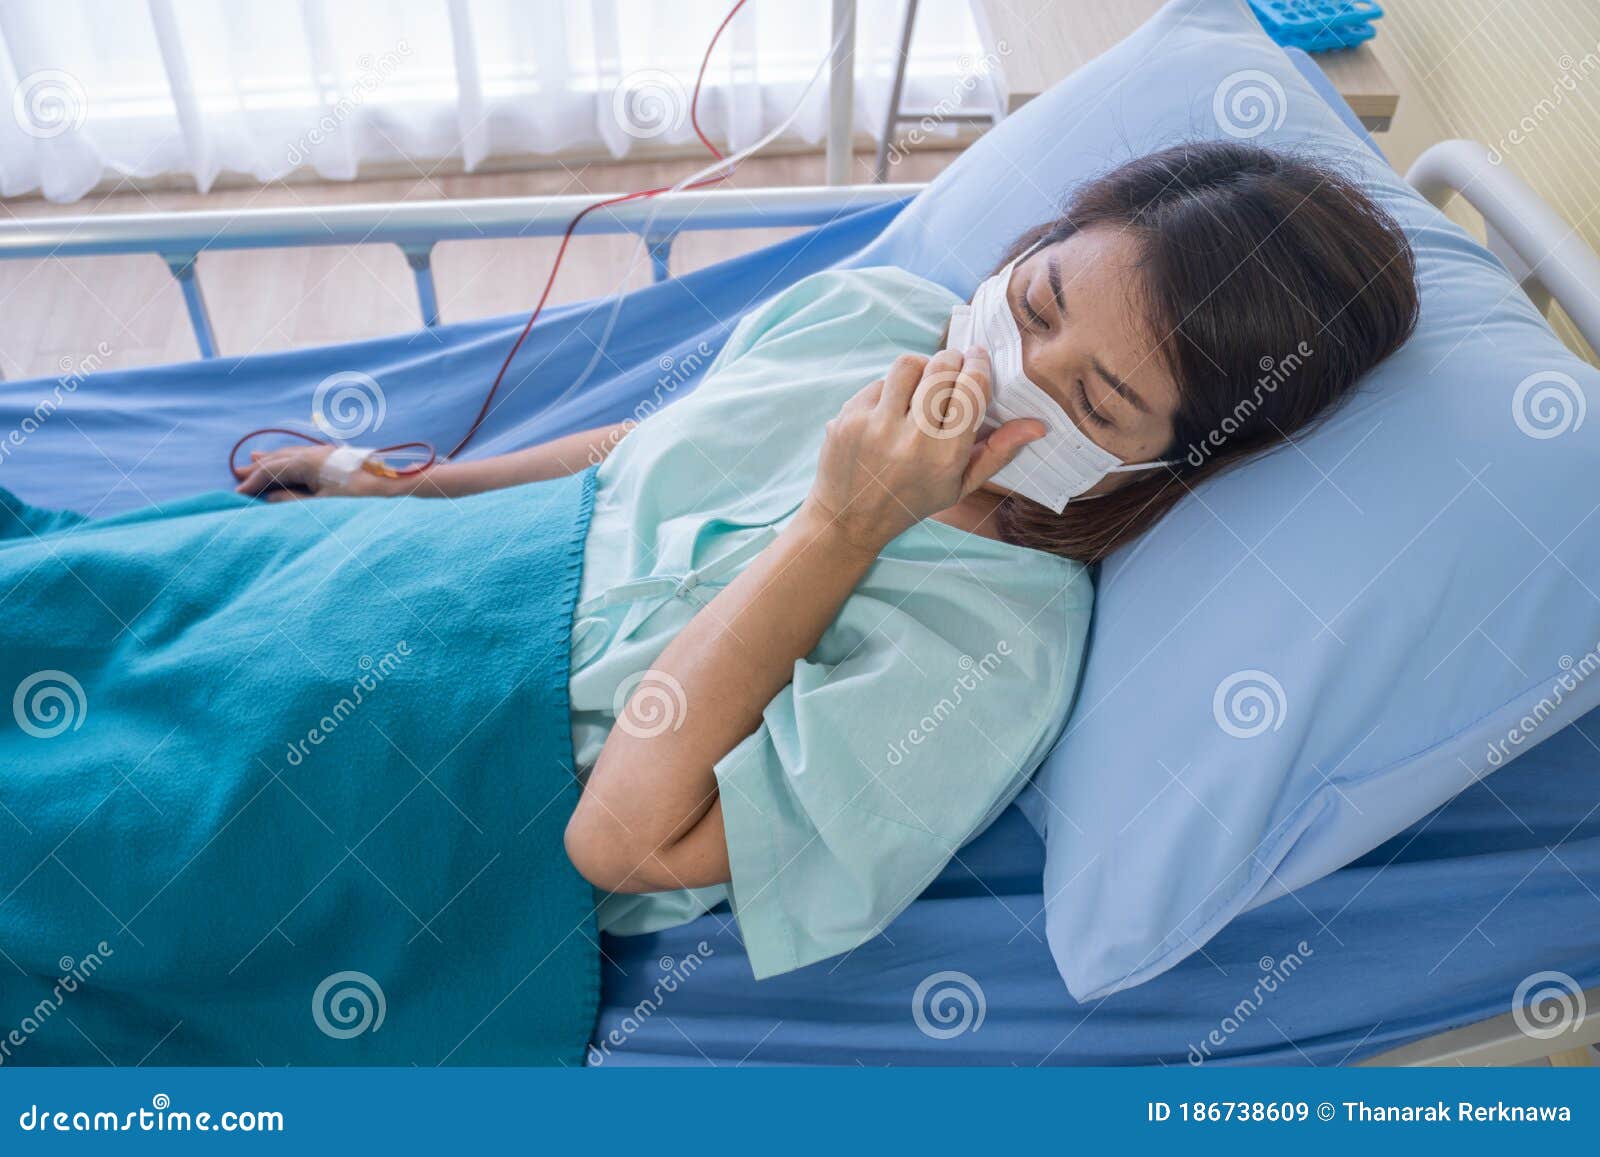 asian woman is sick has a high fever, sneezing, is recuperating in the patient`s dress lay on the patient bed in the hospital wit